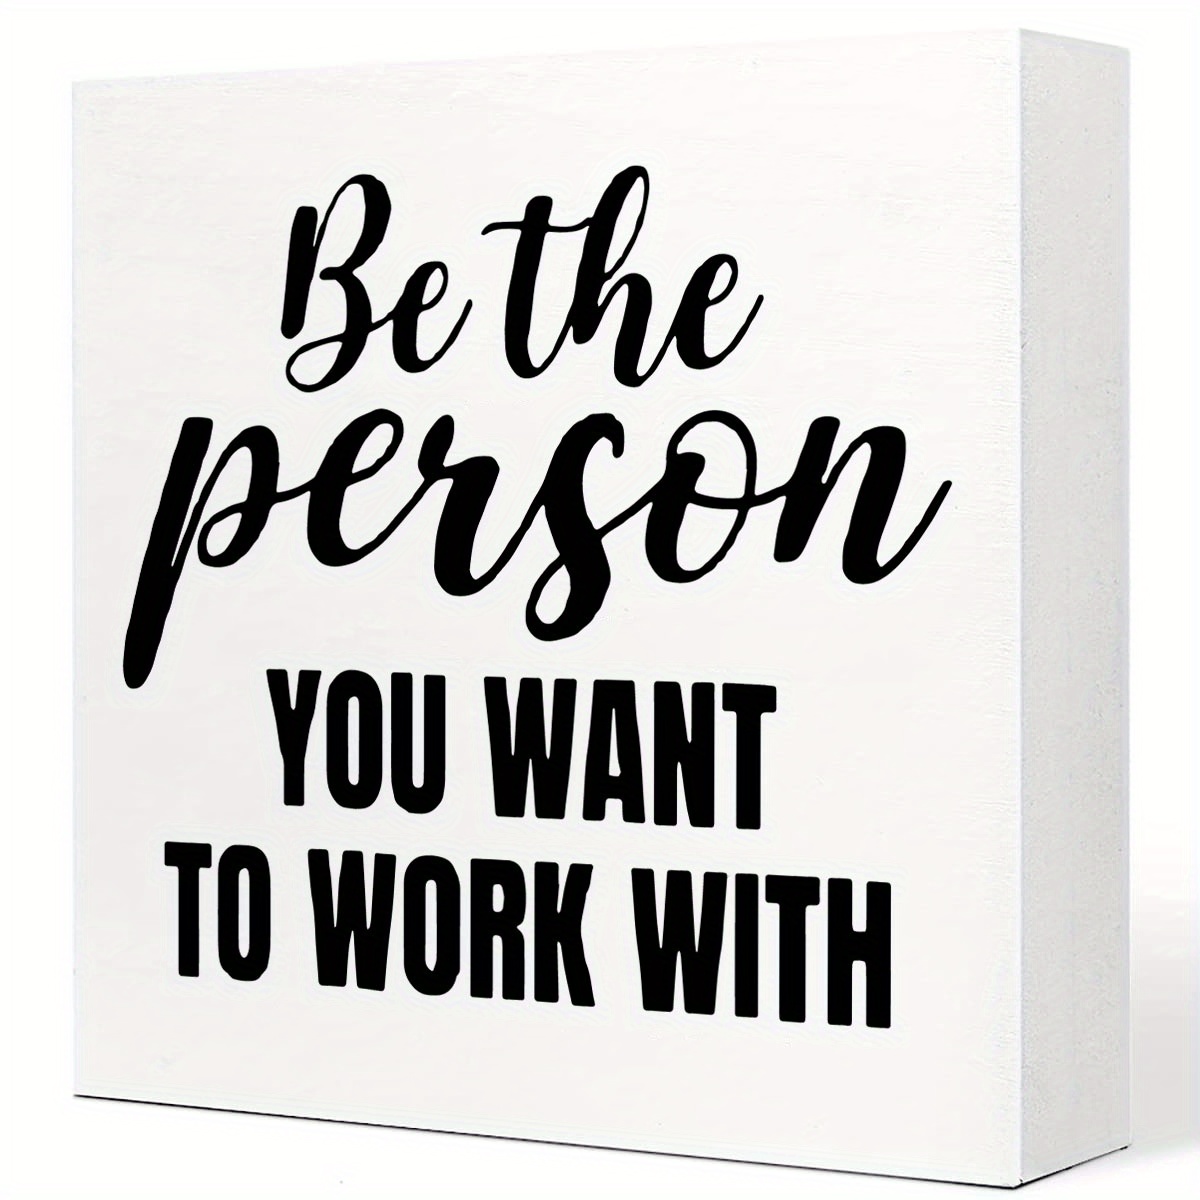 

1pc, Be The Person You Want To Work With Wooden Box Sign, Inspirational Desk Decor For Office, Bathroom, Bedroom, Or Living Room, Funny Office Decor With Humor And Primitive Charm